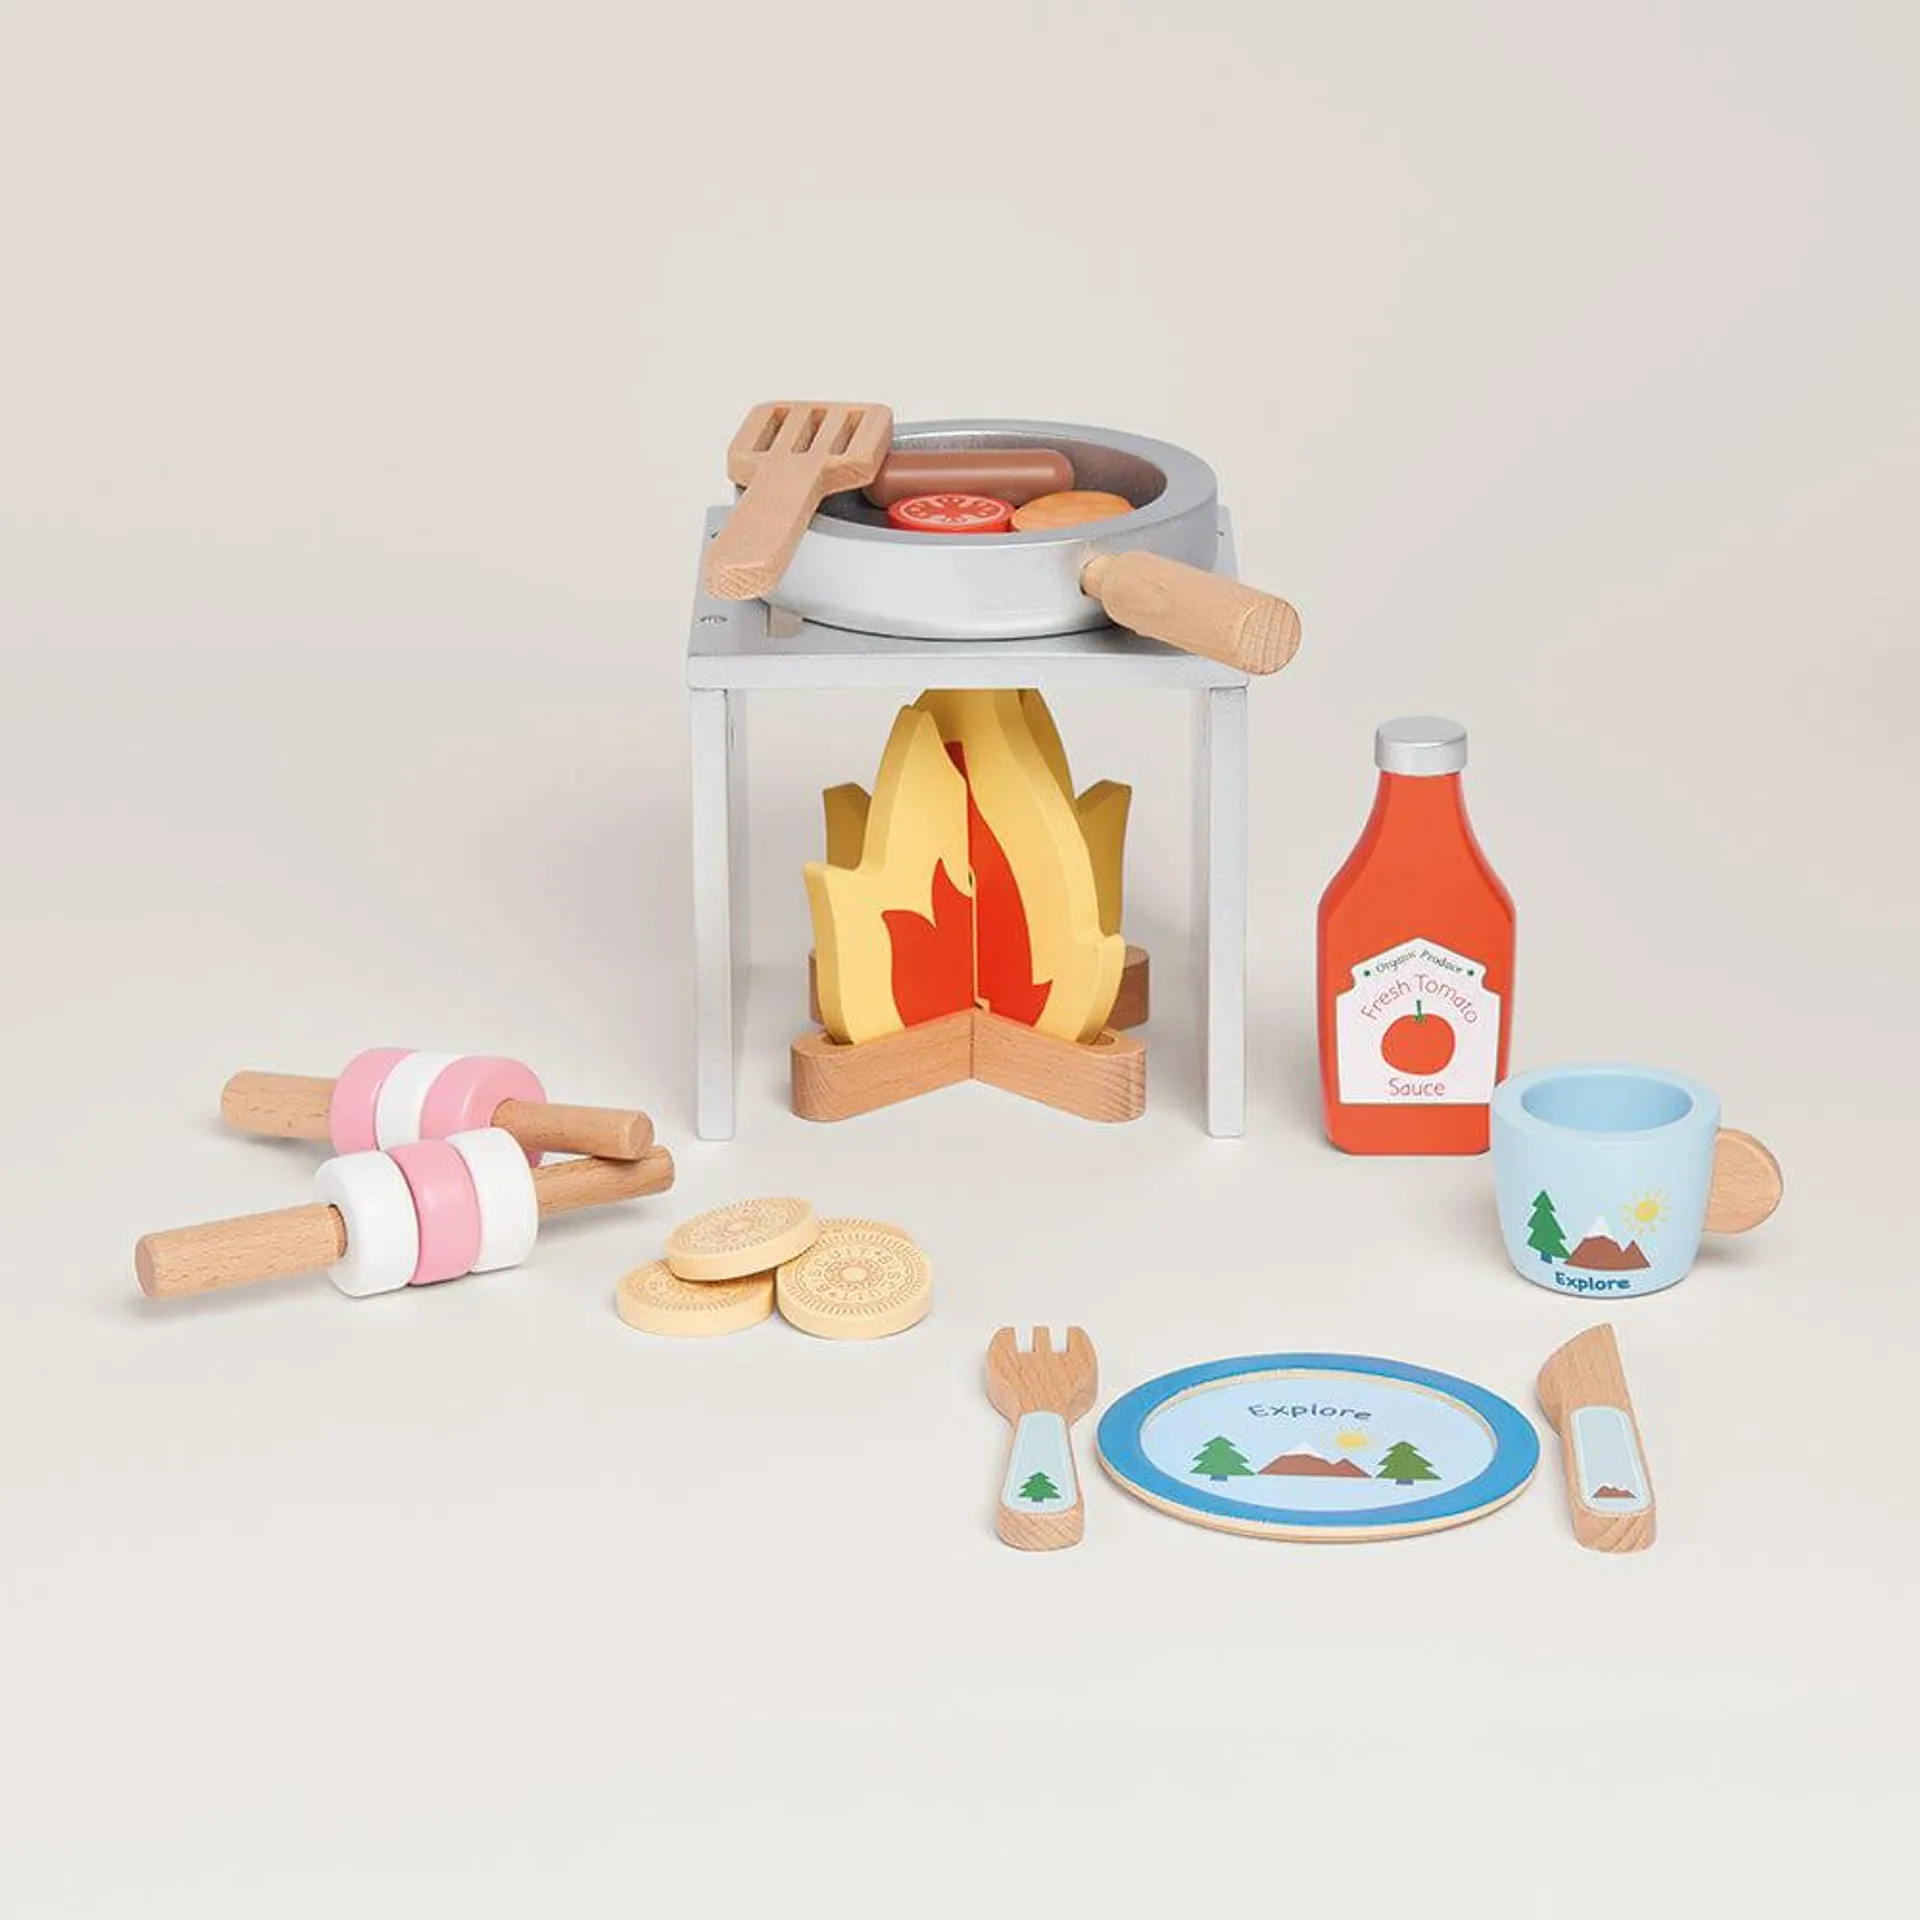 Wooden Campfire Cooking Set